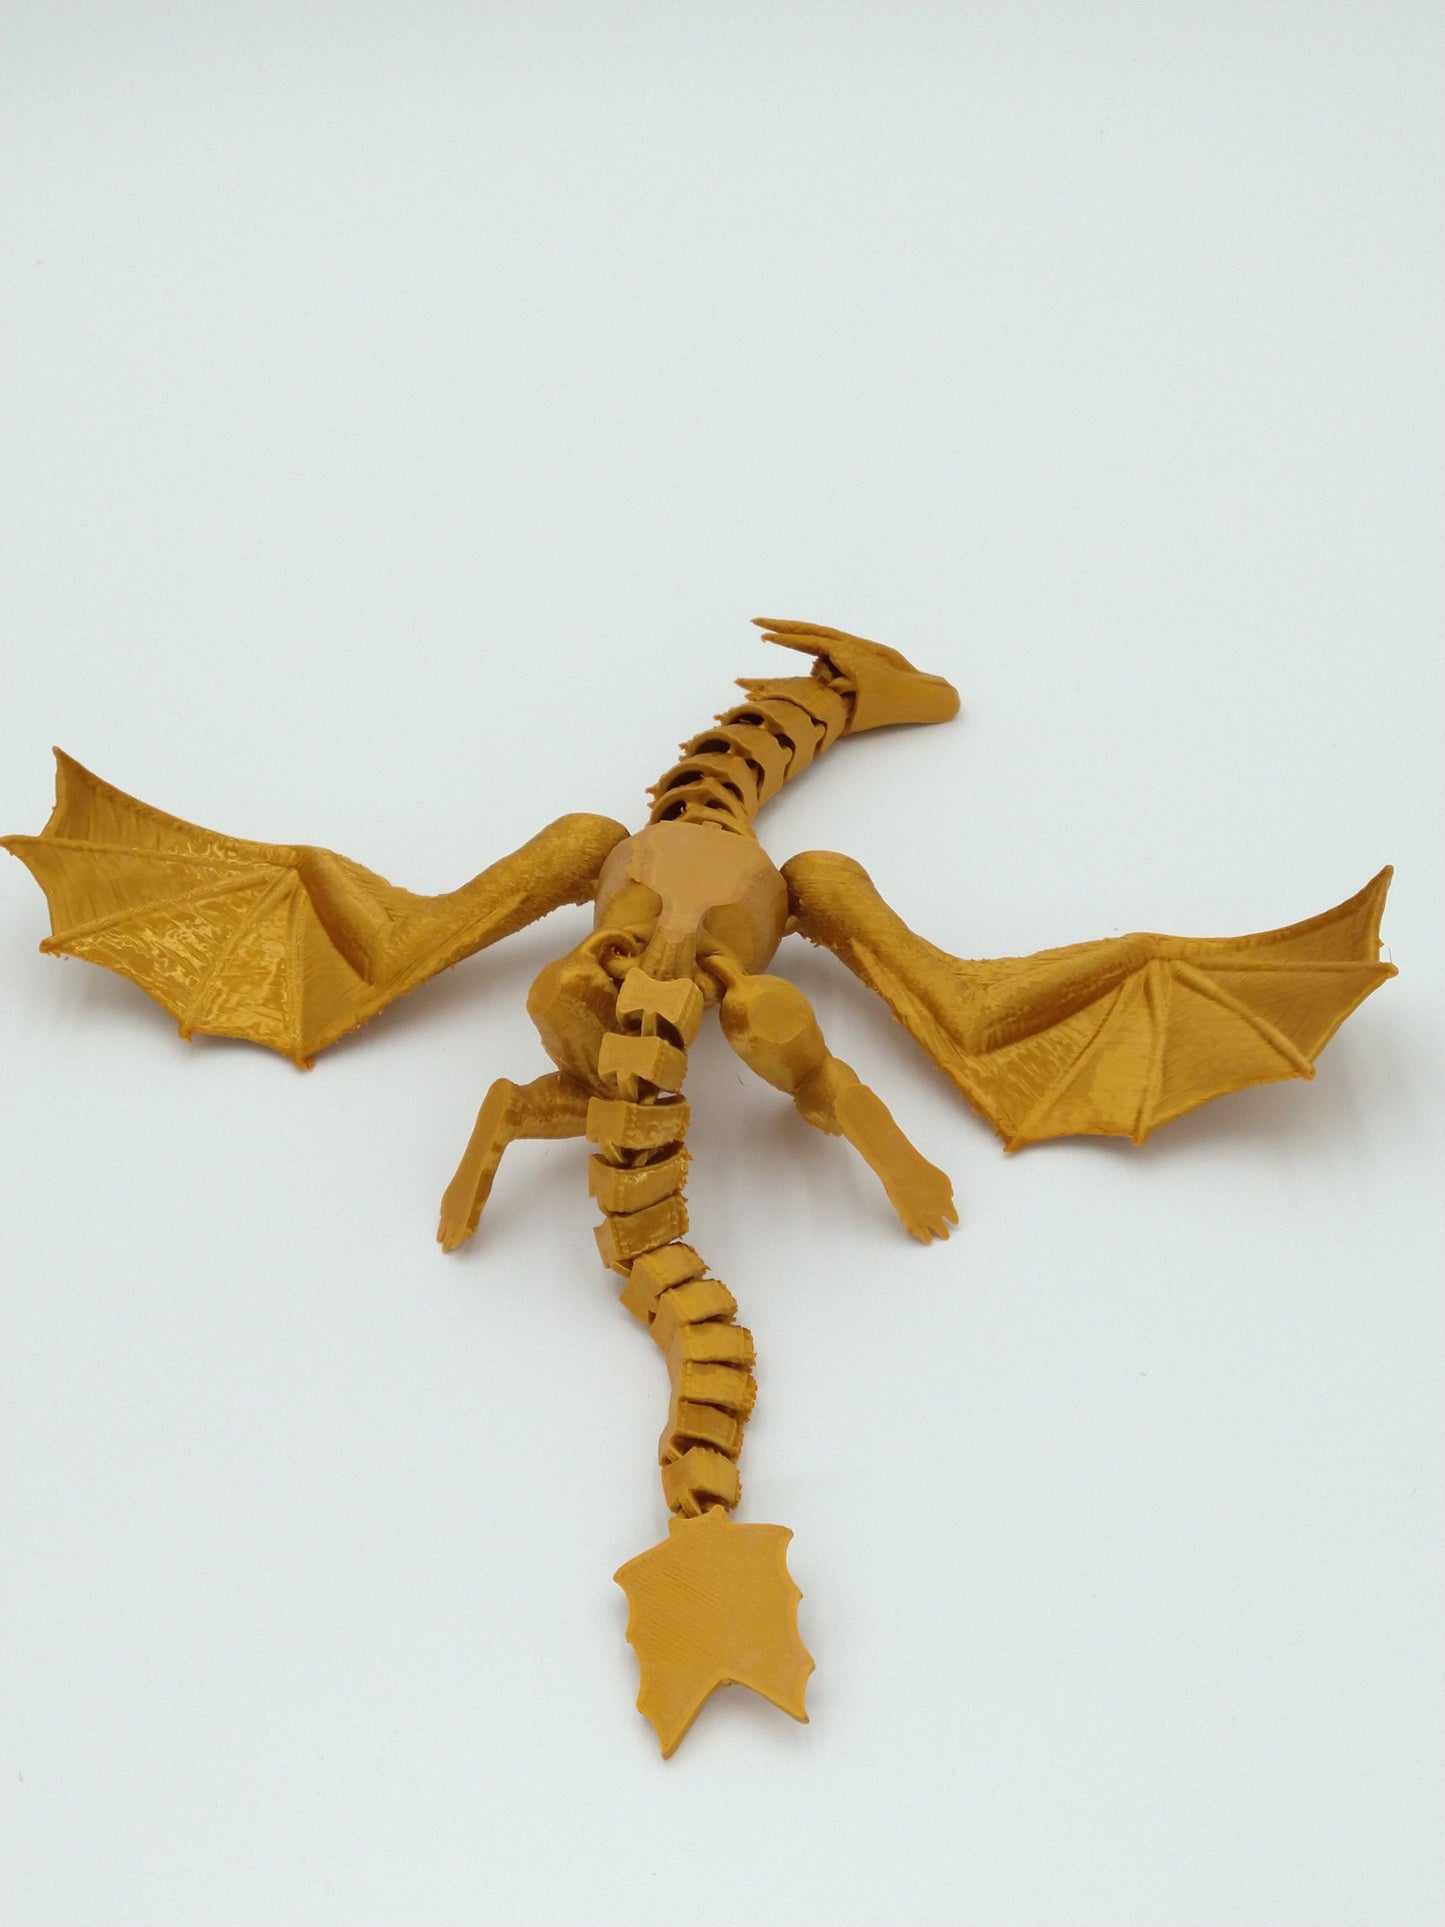 SYRAX Dragon Articulated Flexi Gold 12" 3D Printed Figure